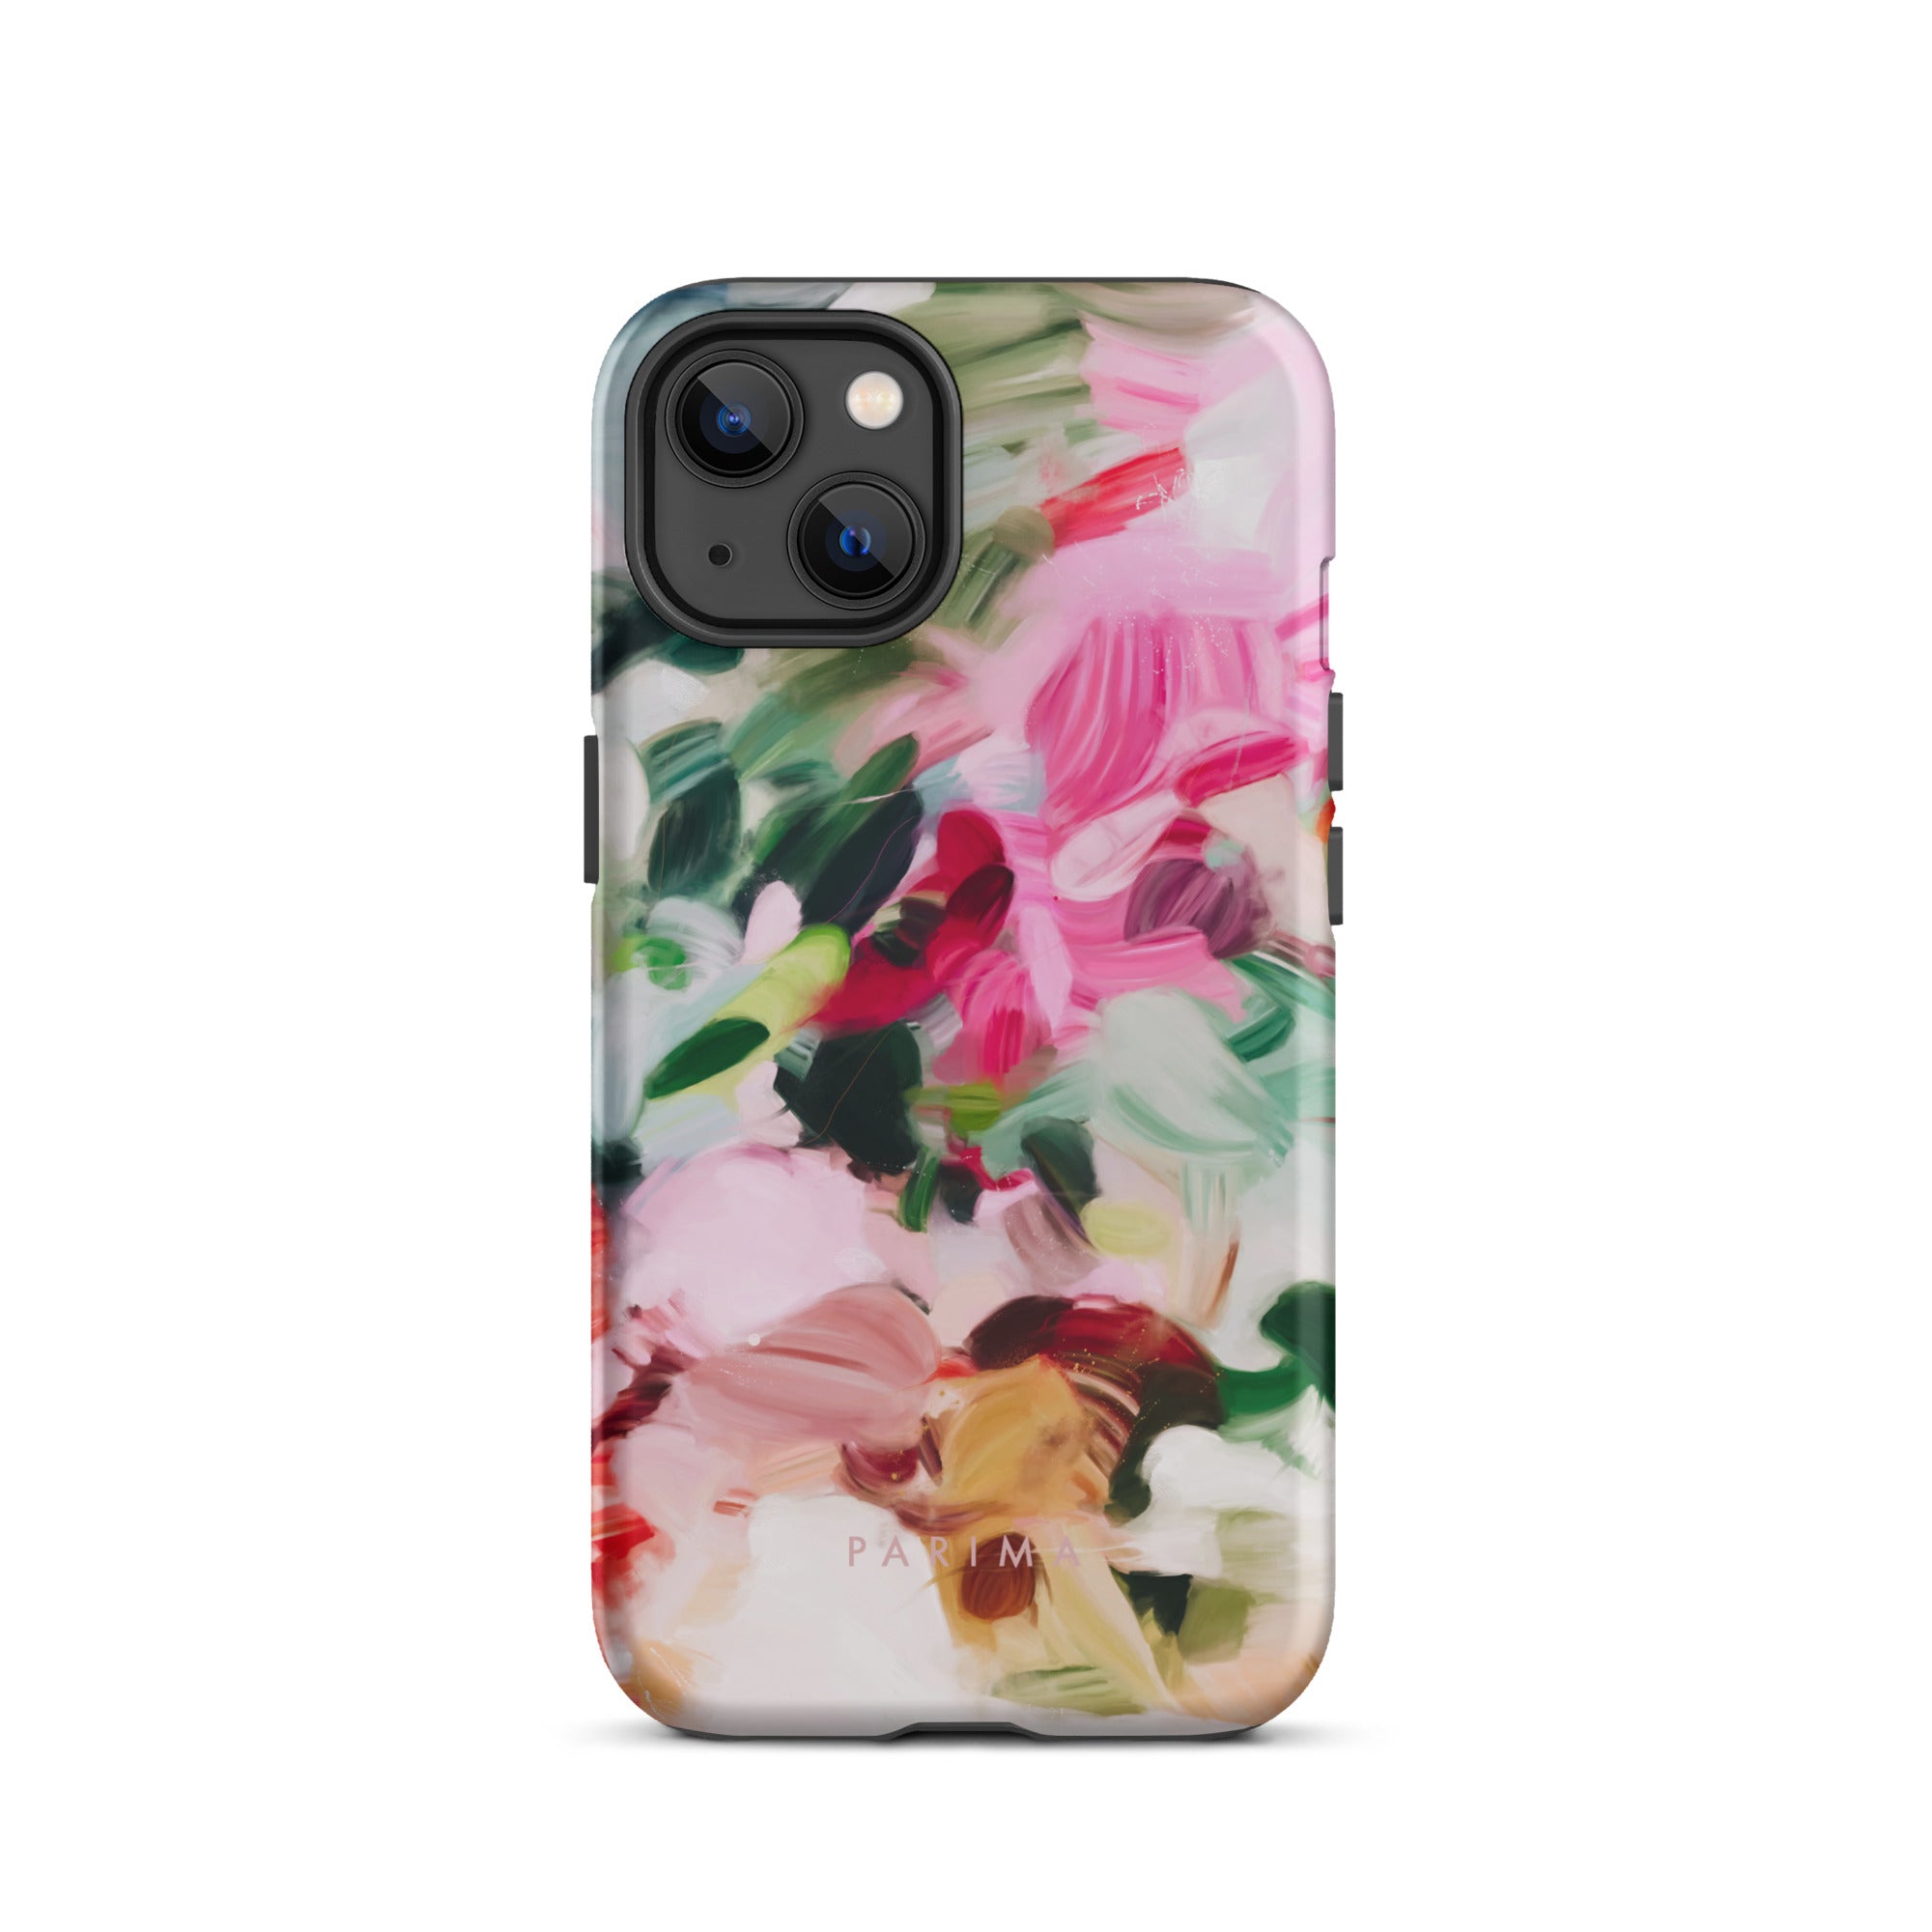 Bloom, pink and green abstract art - iPhone 13 tough case by Parima Studio